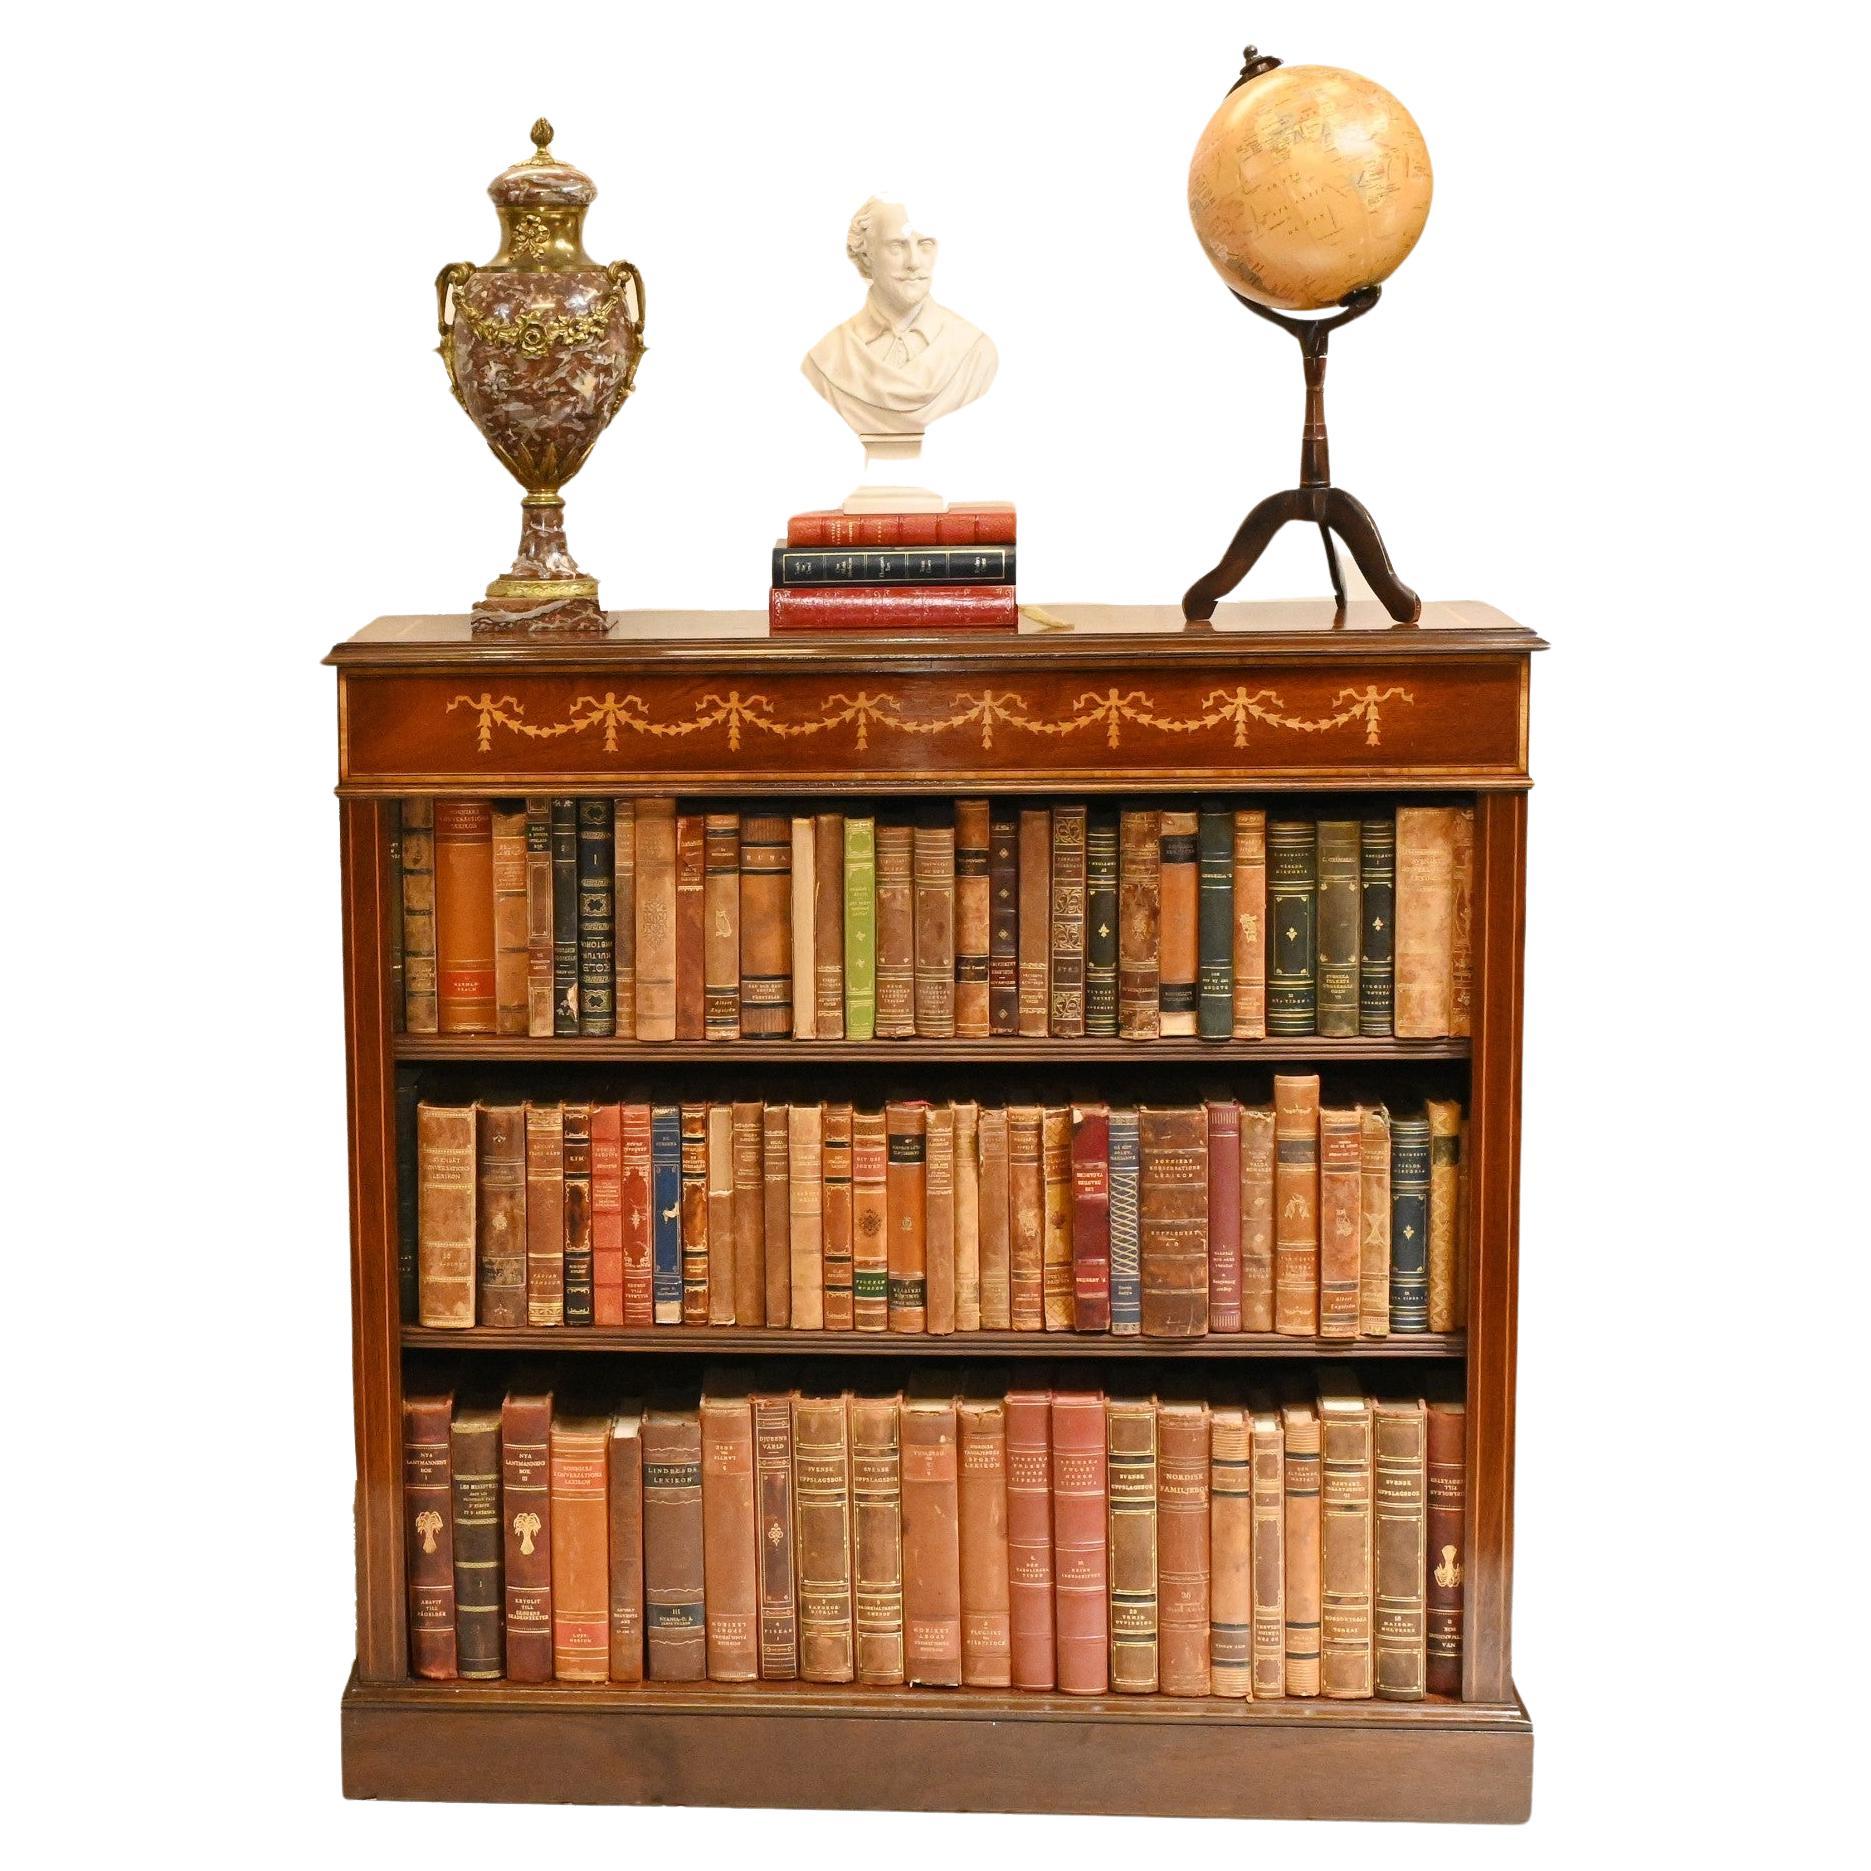 Viewings possible in our Hertfordshire warehouse - please contact for an appointment
Gorgeous single English Sheraton style low openfront bookcases hand crafted from mahogany
Hand crafted in England to centuries old traditions - will last for many